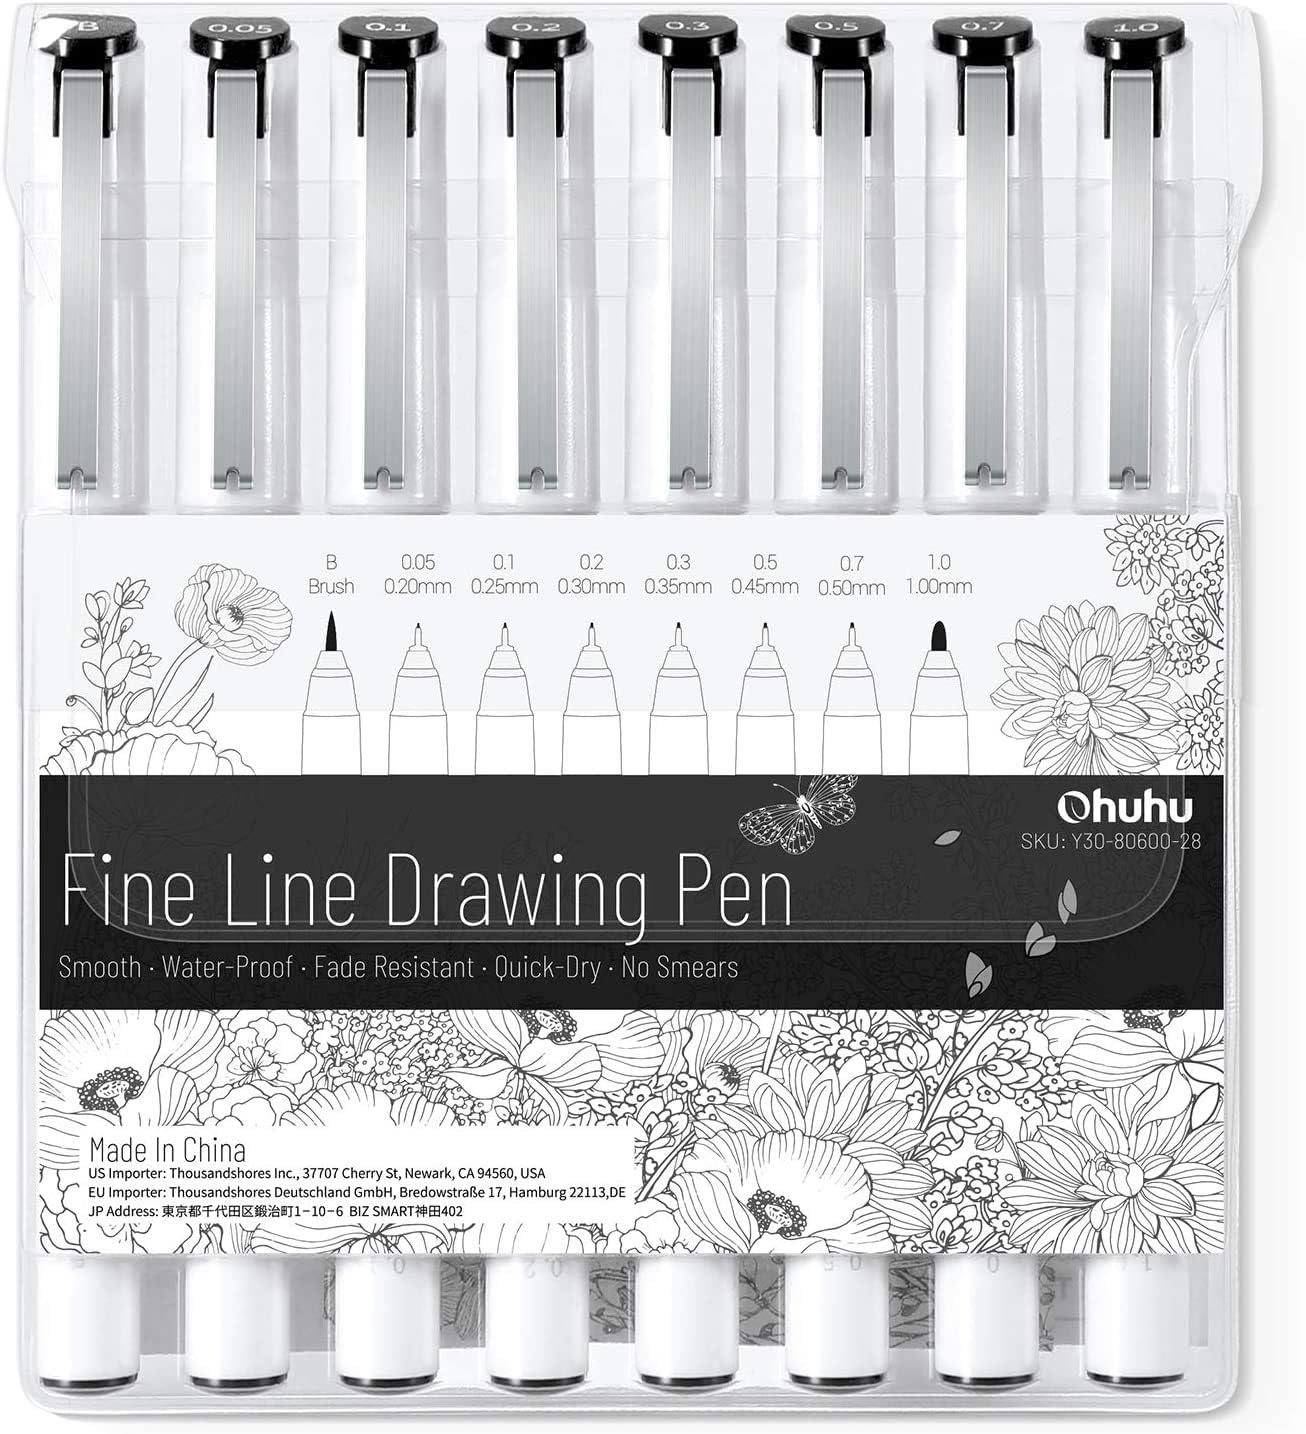 Ohuhu Micro Pen Fineliner Drawing Pens: 8 Sizes Fineliner Pens Pigment Black Ink Assorted Point Sizes Waterproof for Writing Drawing Journaling Sketching Anime Manga Watercolor for Artists Beginners